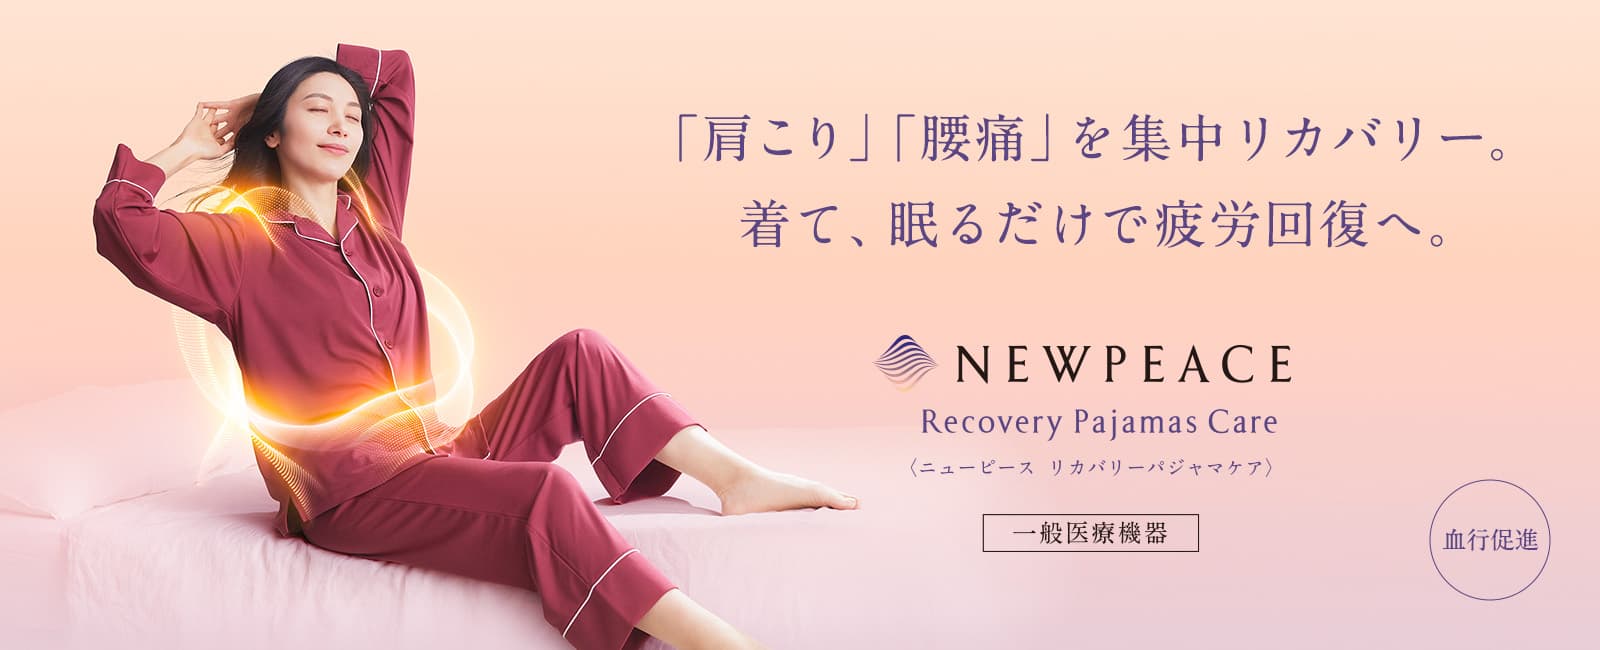 NEWPEACE Recovery Pajamas Care 着て、眠るだけで疲労回復へ。